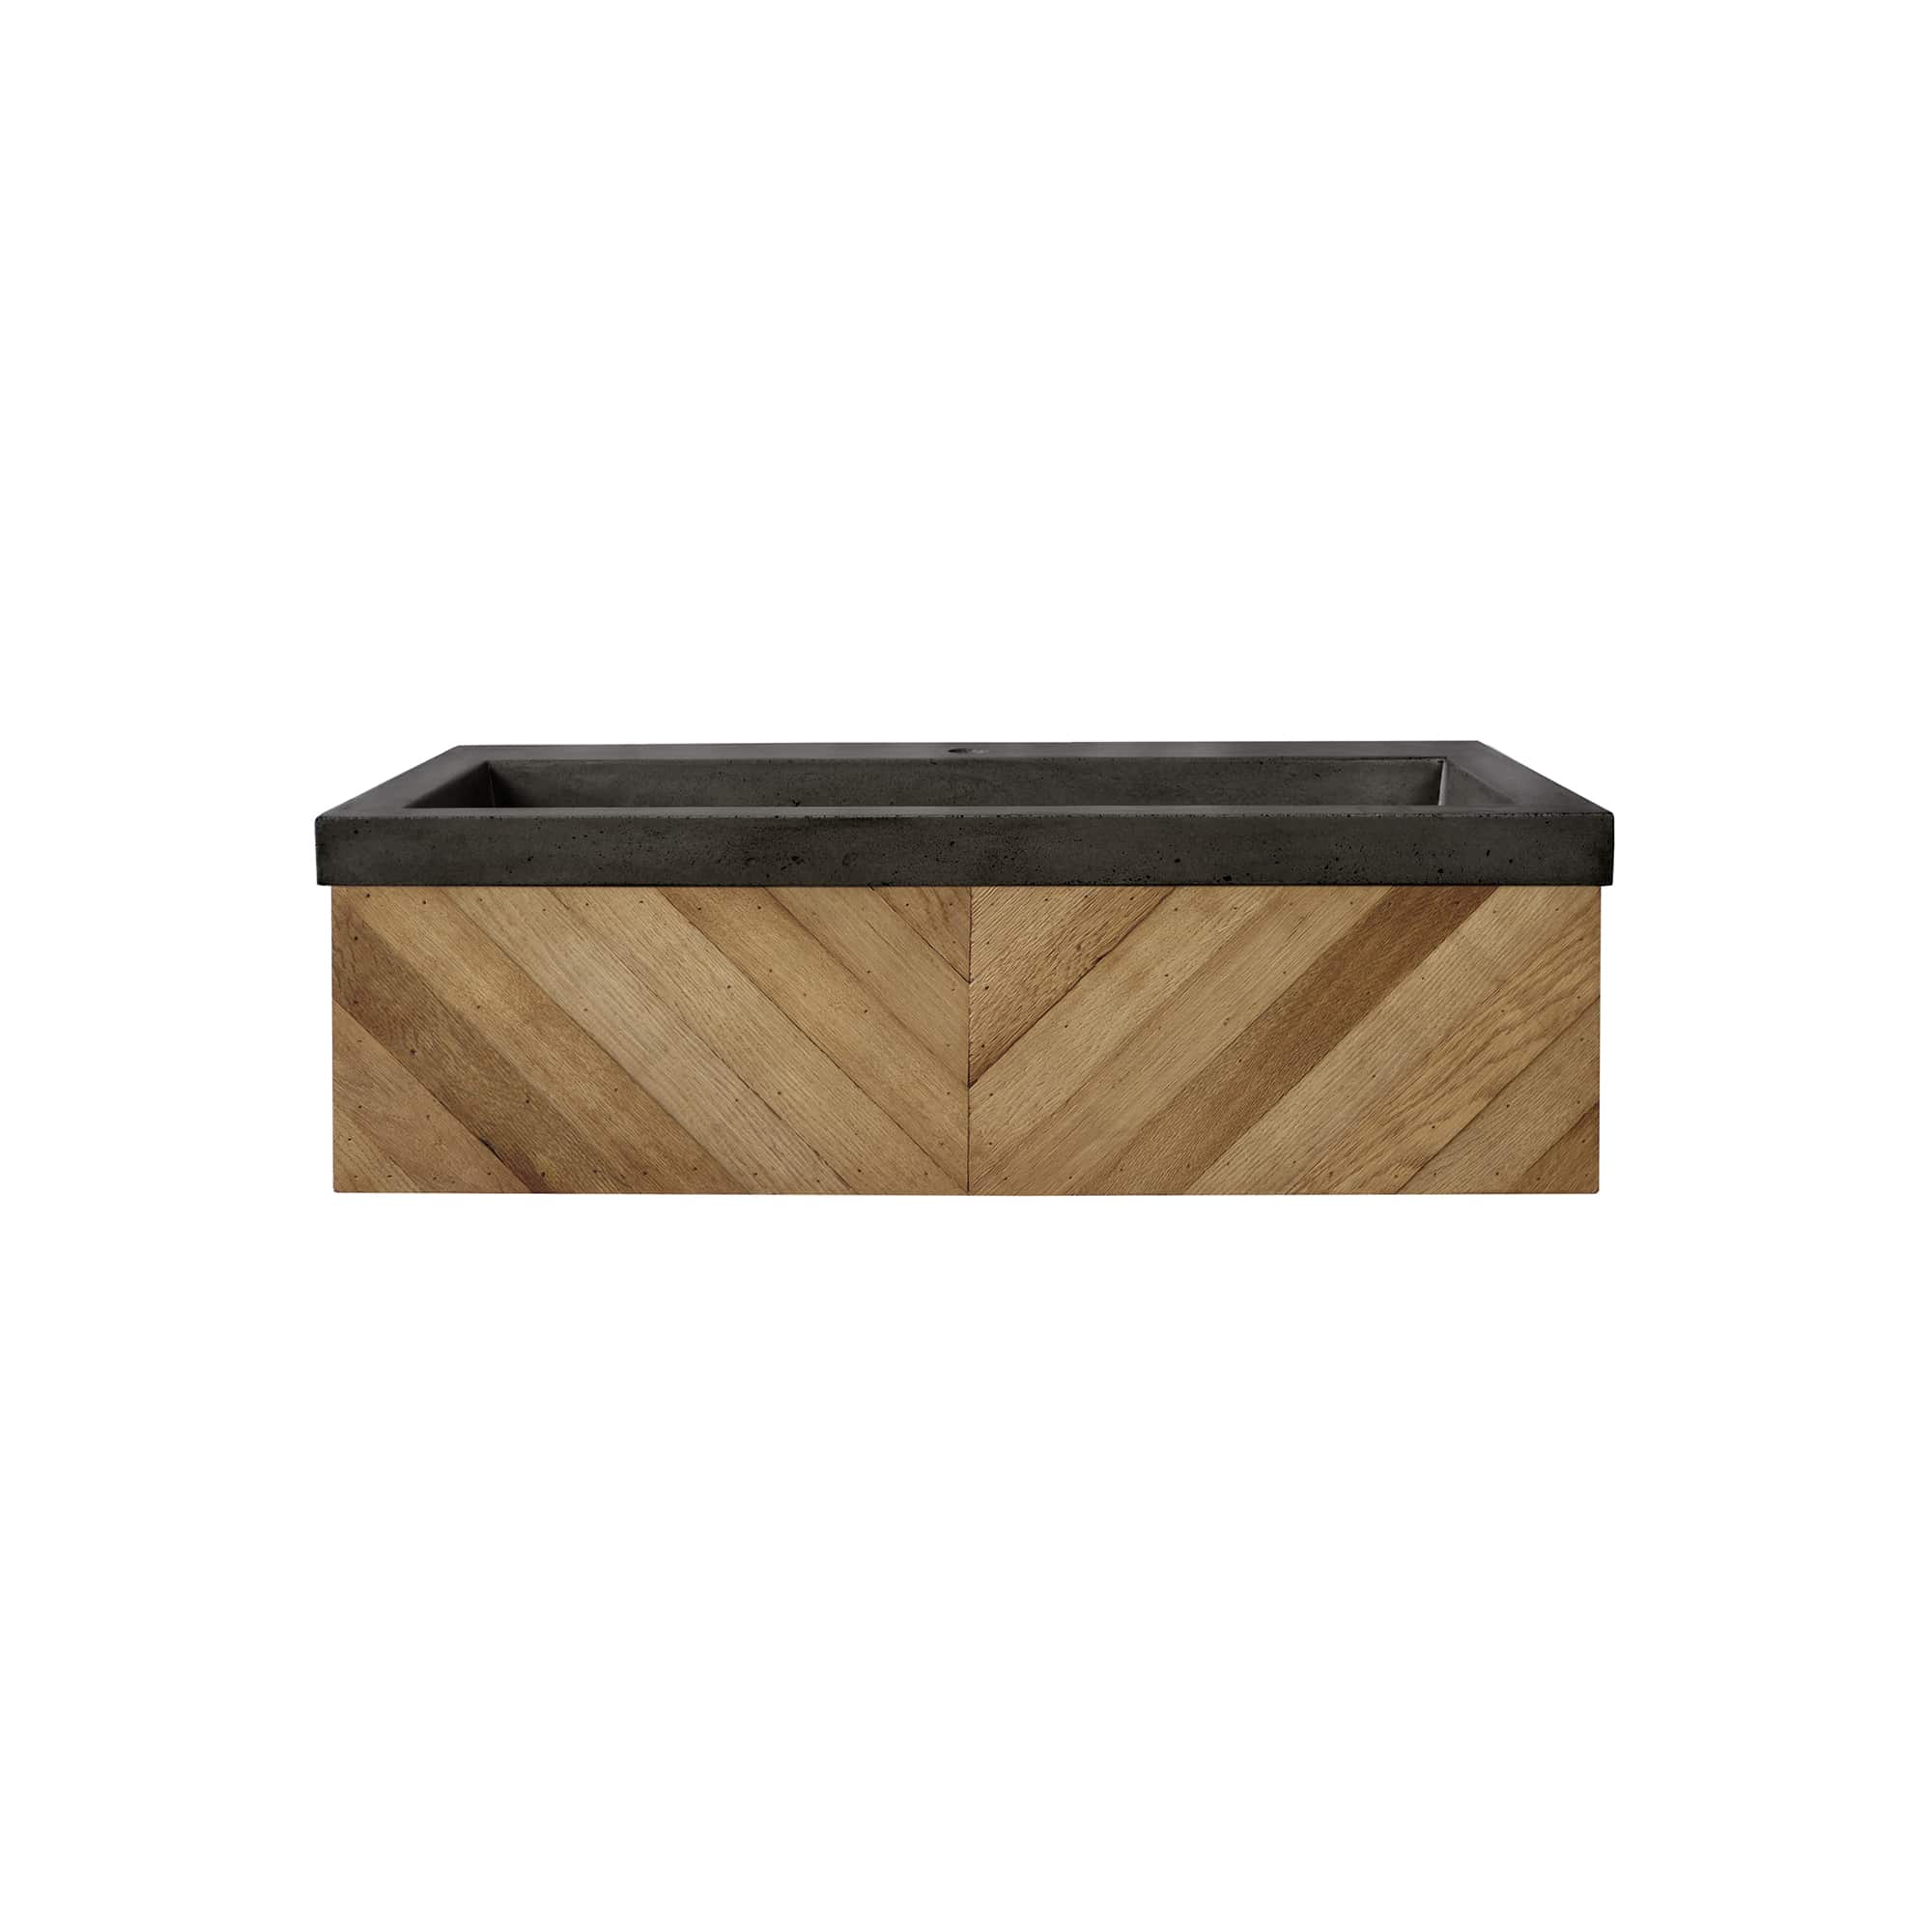 Native Trails 36 inch Chardonnay Floating Vanity with NativeStone Trough Sink in Slate, VNW191-NSL3619-S